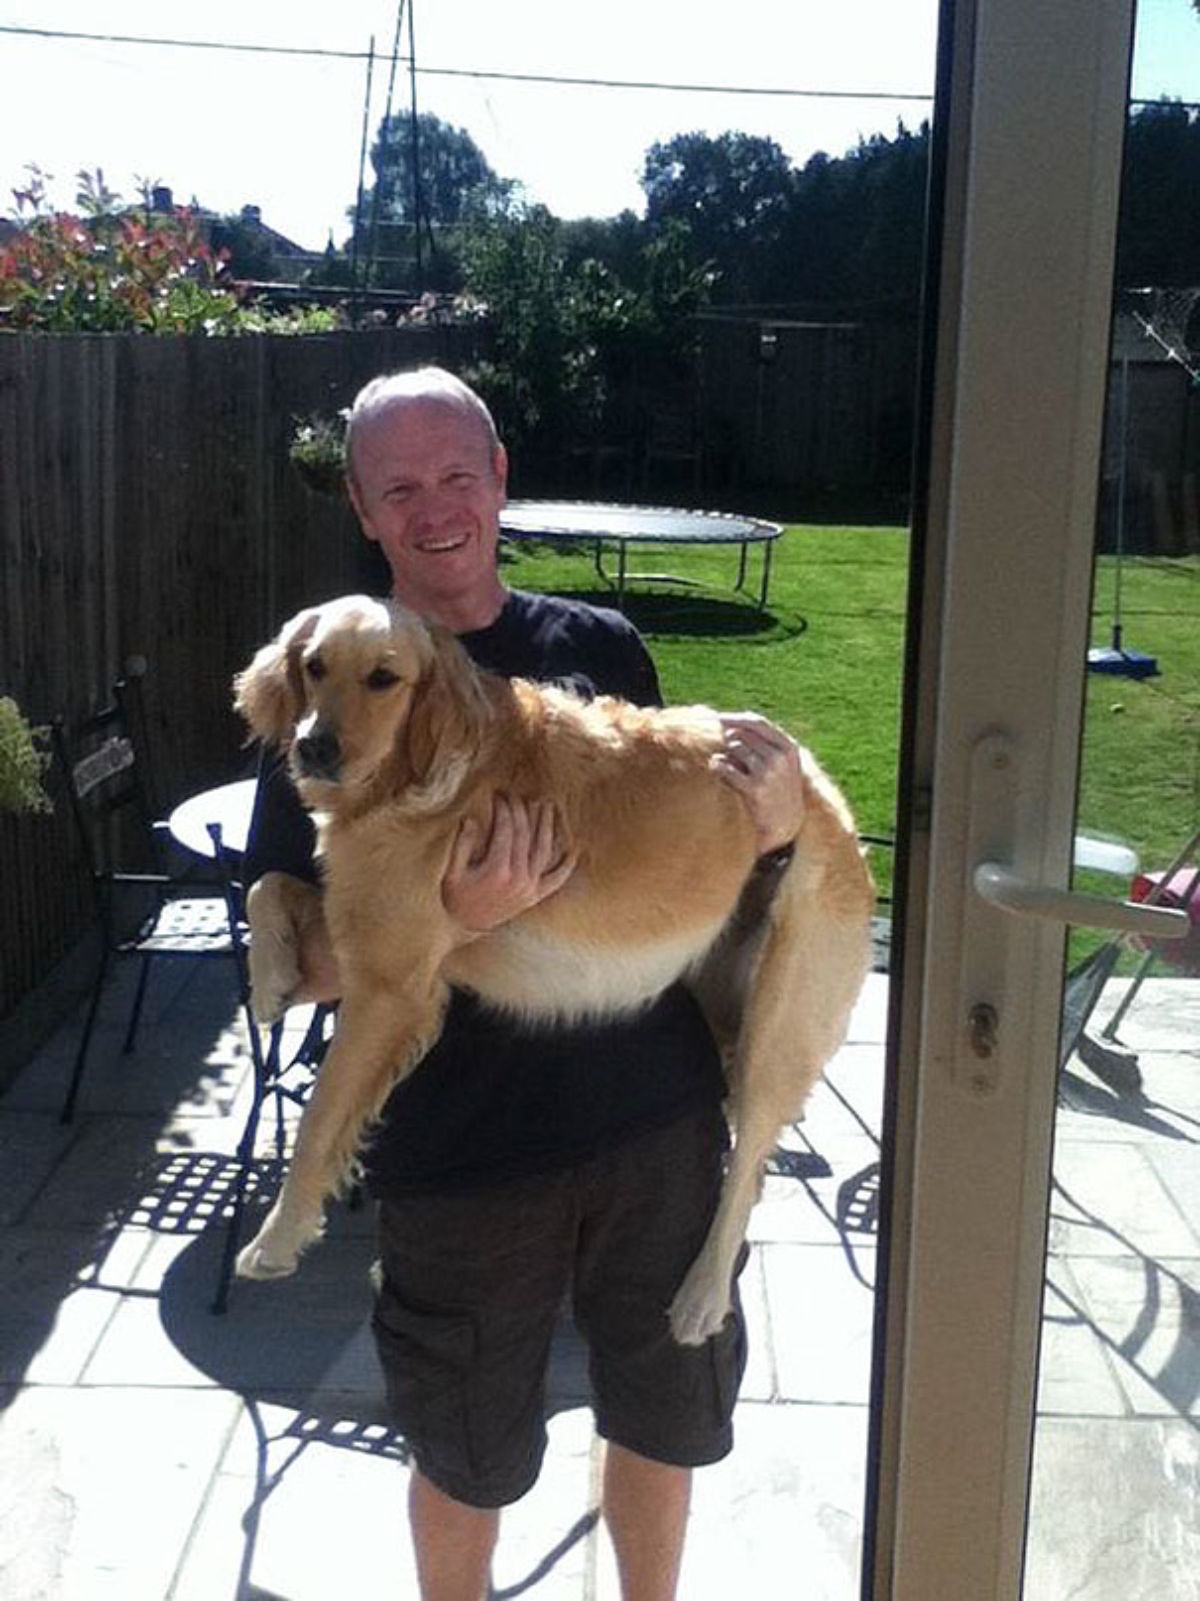 golden retriever being held and carried by a man in a garden